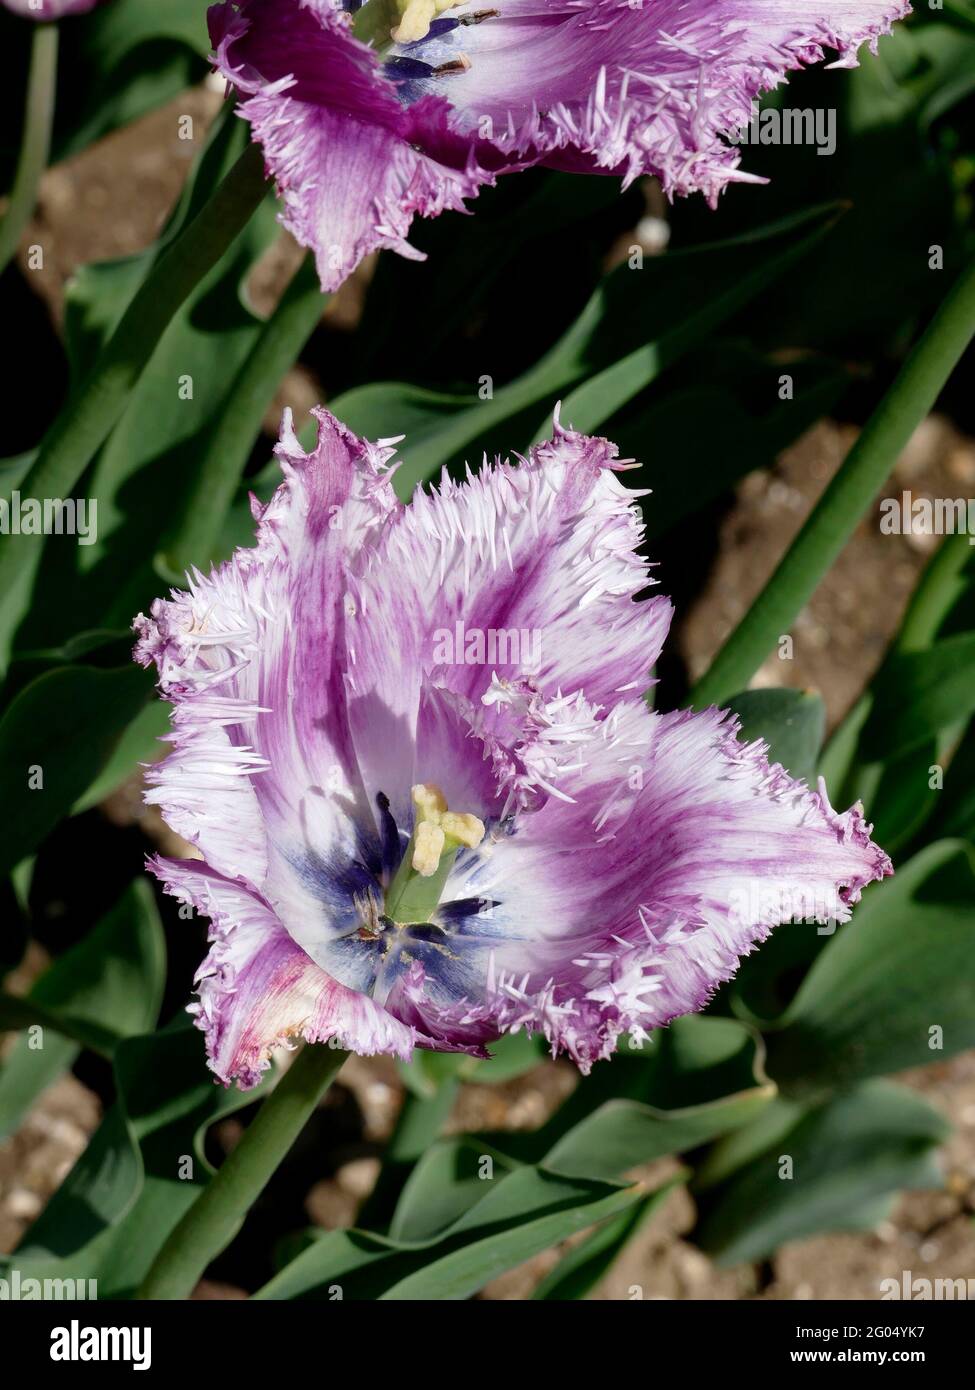 Purple Circus Tulip Flowers with Fringed Petals with White Frosted Tips Stock Photo